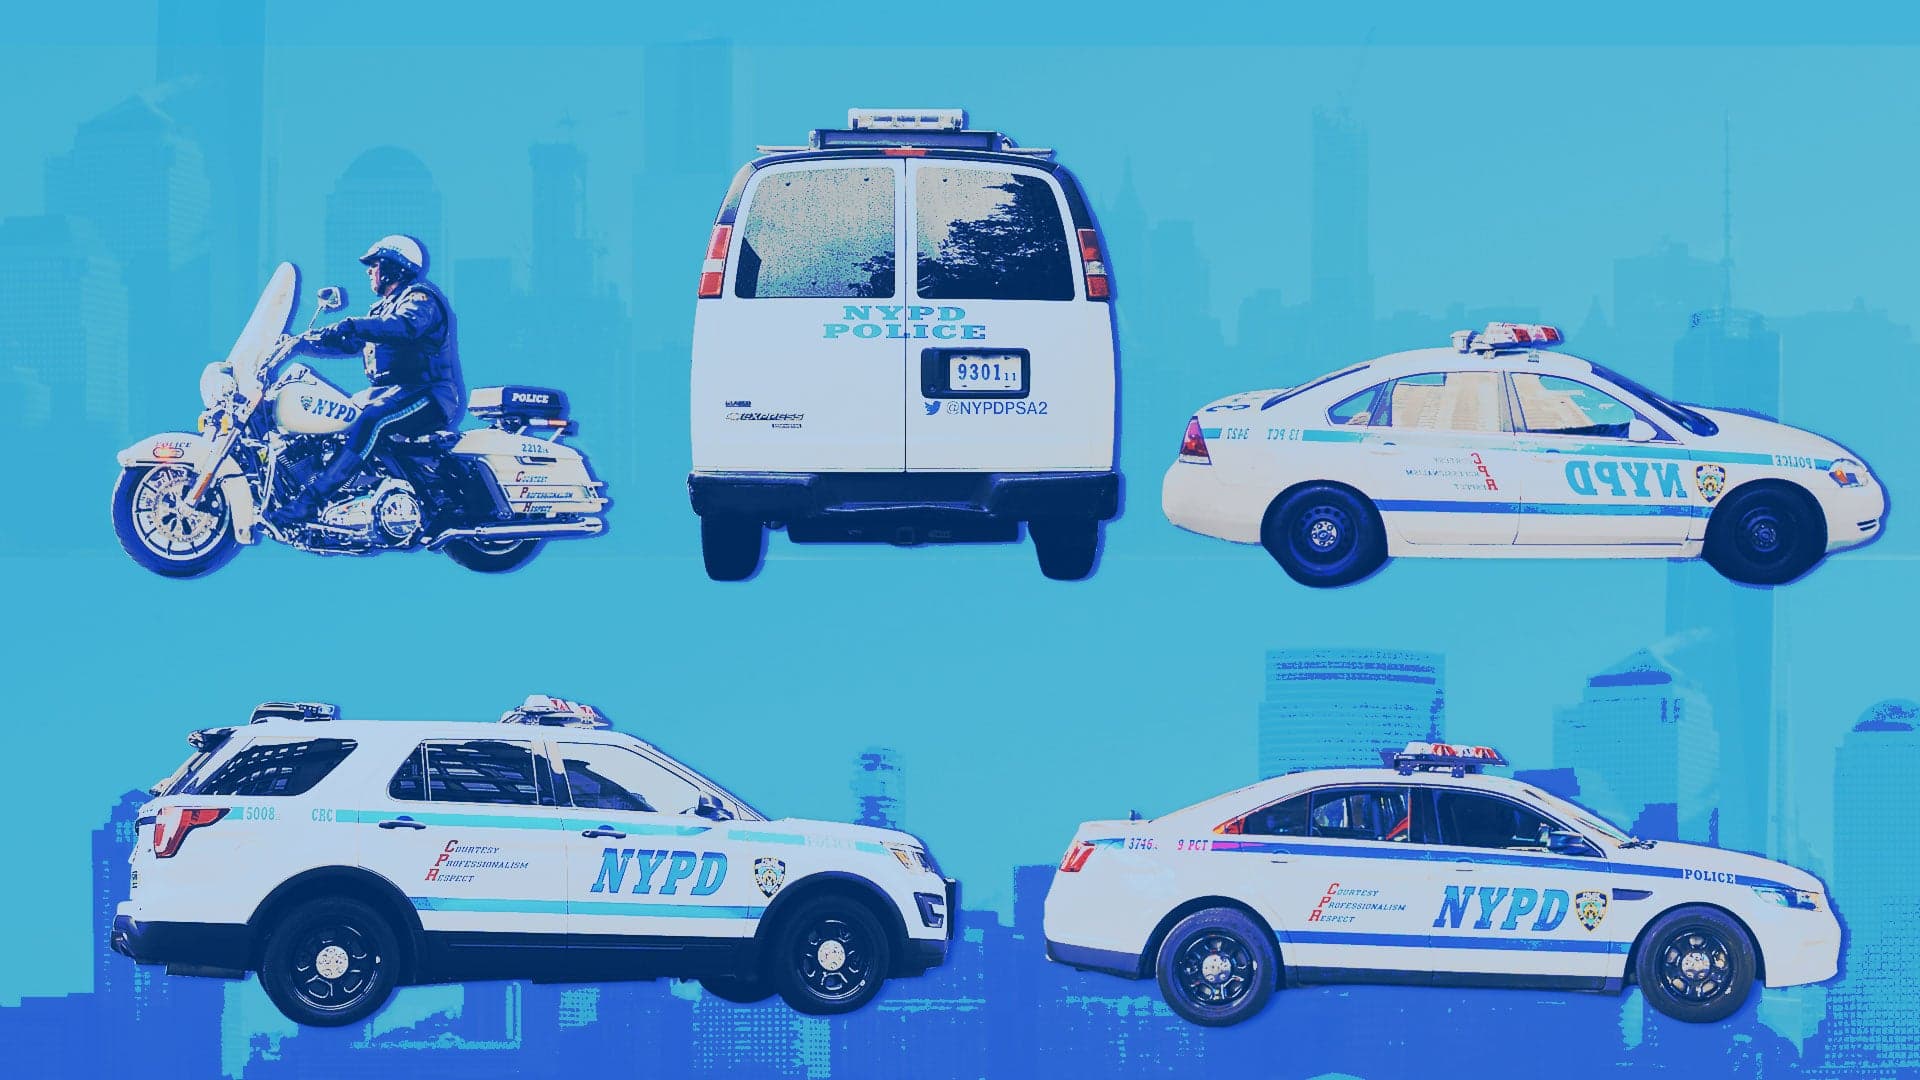 The Kickass Machines of the NYPD